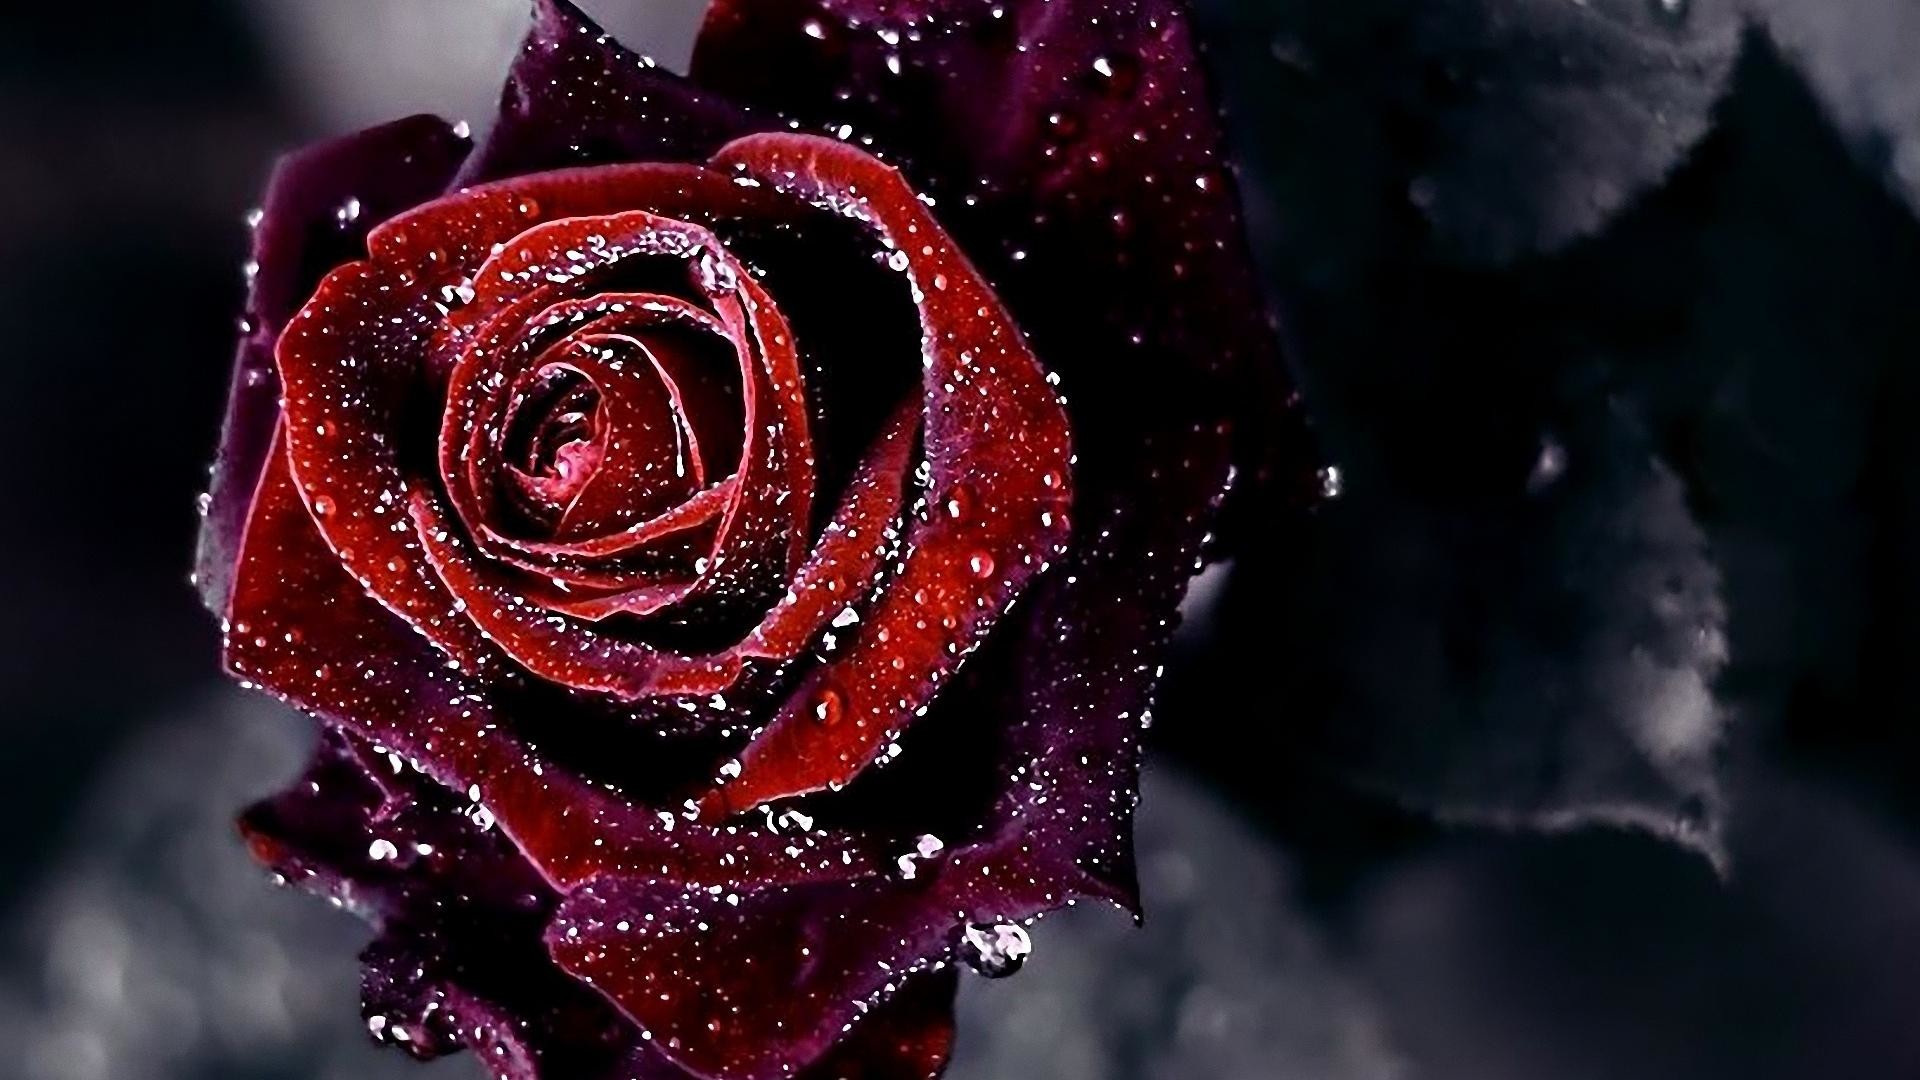 1920x1080 Red And Black Rose Wallpapers 26 Cool Hd Wallpaper